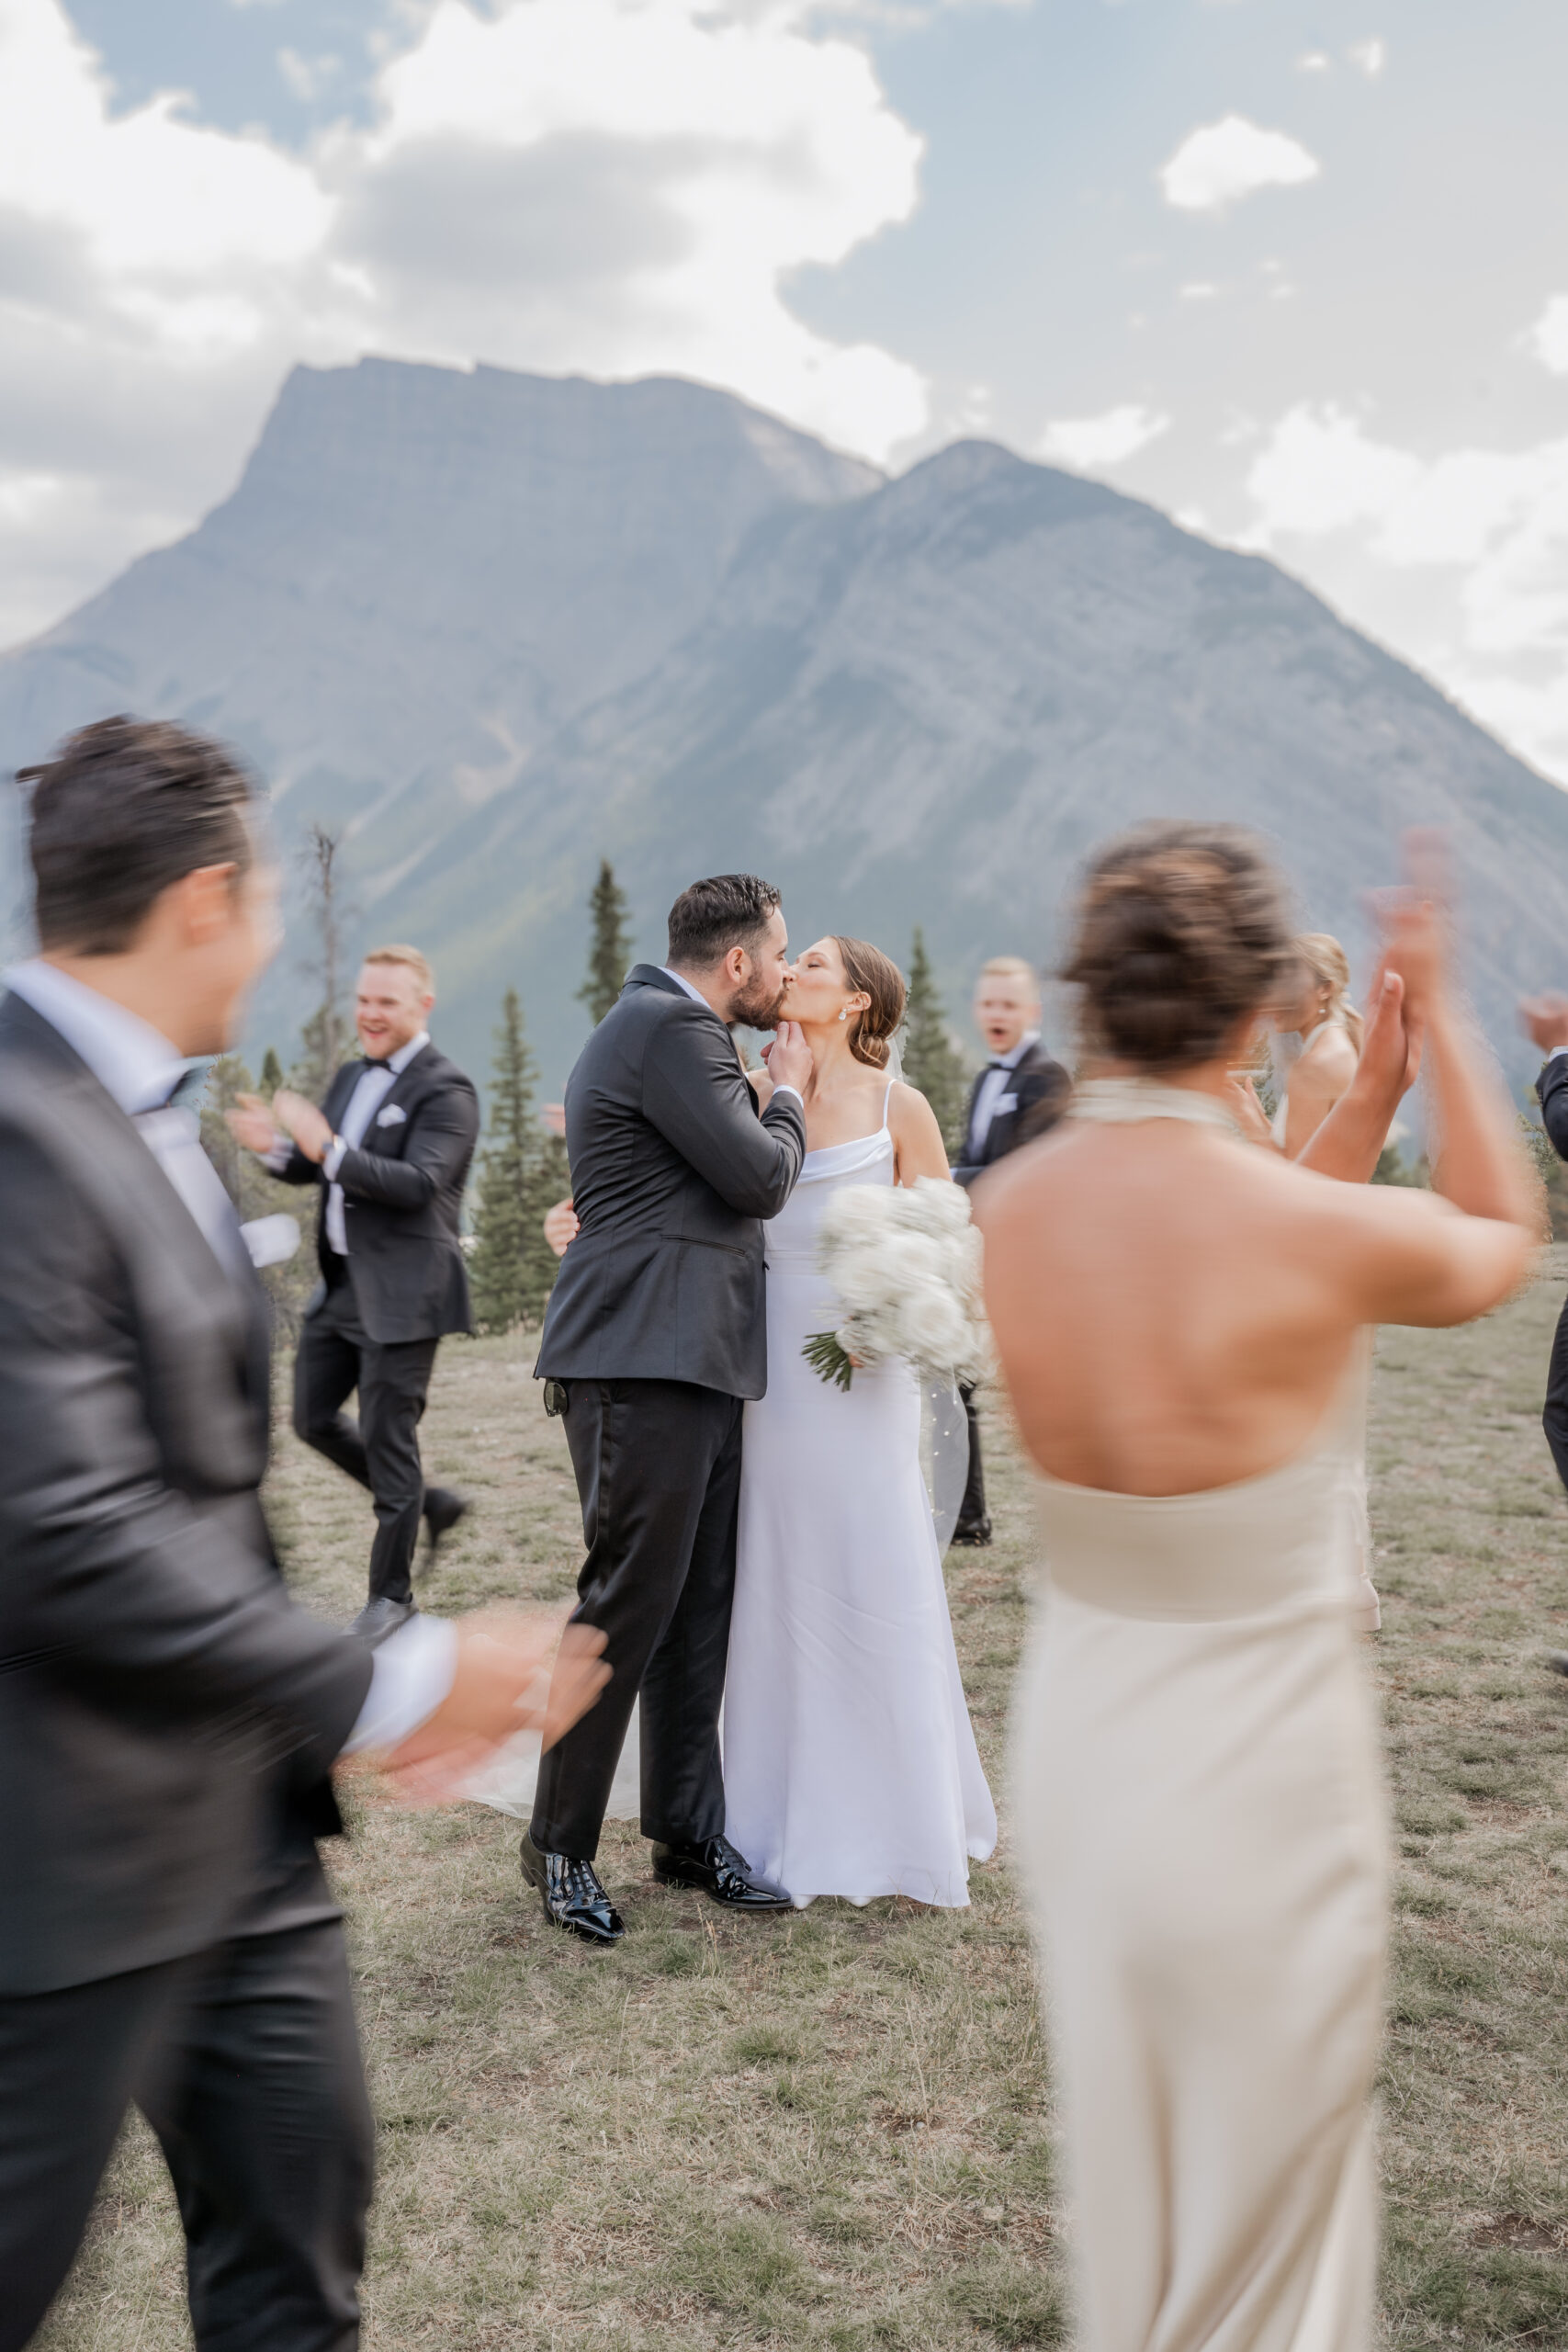 Banff Wedding Photography at Tunnel Mountain